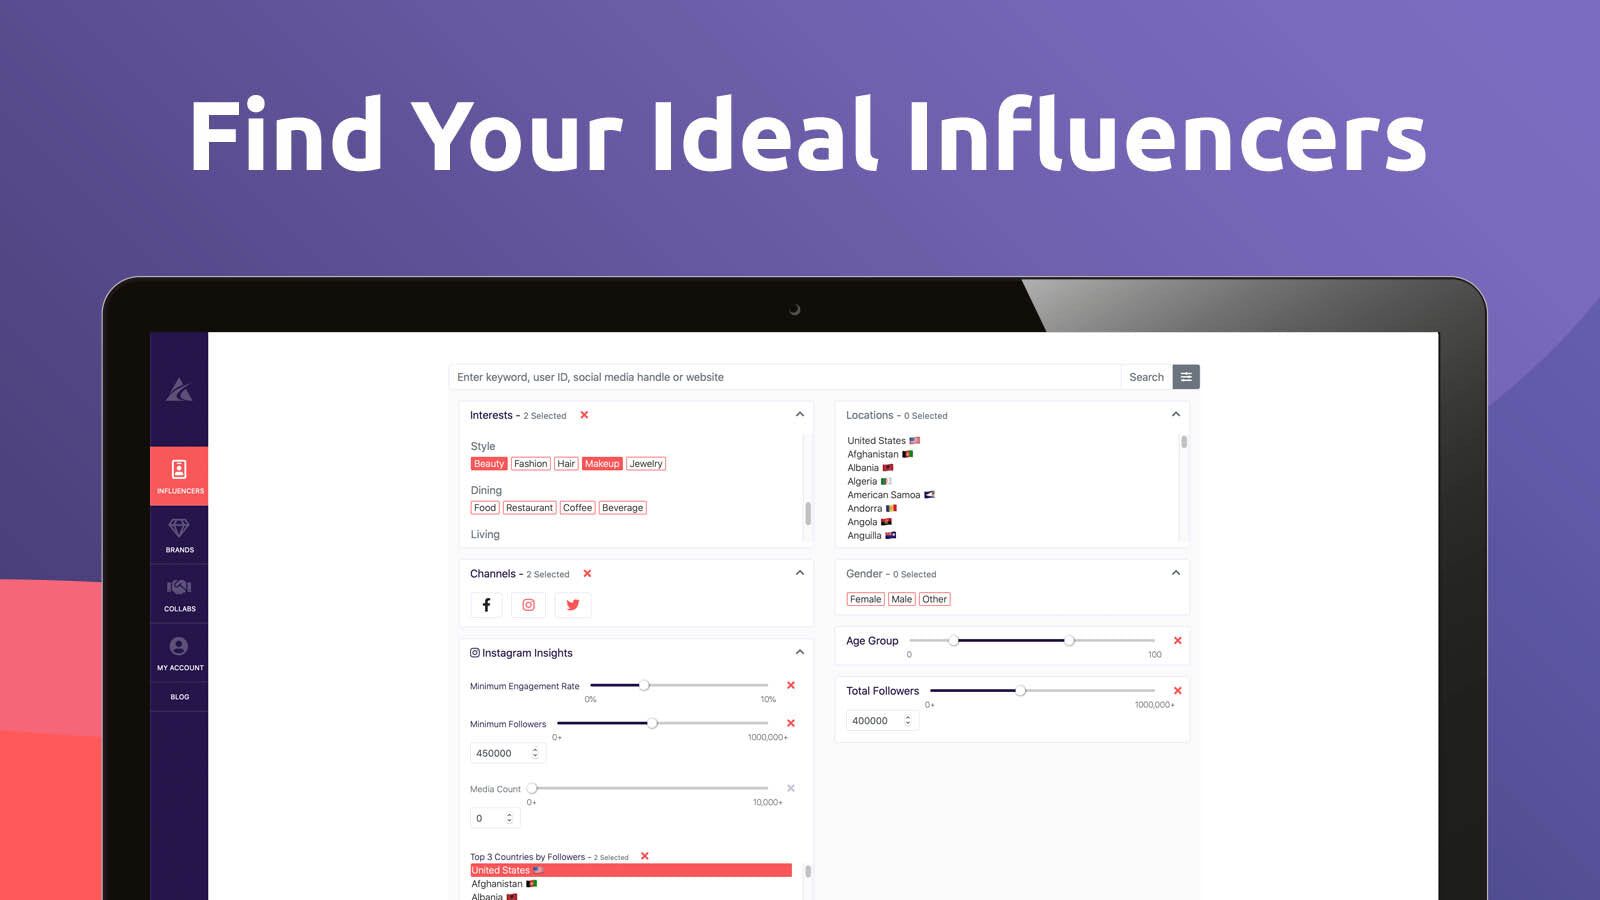 Search for the ideal Collab for your followers and influence!